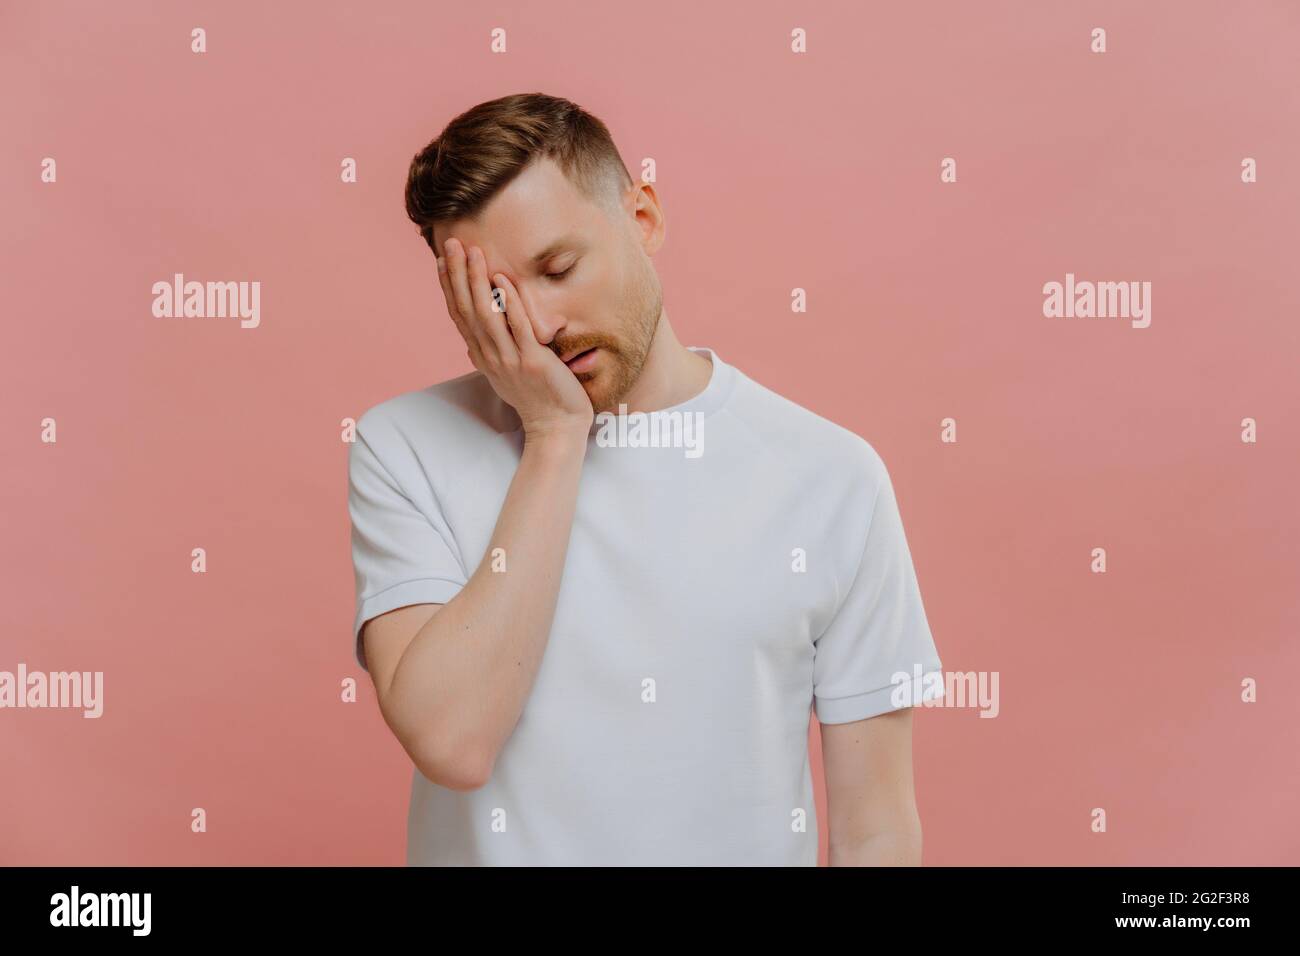 Young exhausted caucasian man posing against pink background Stock Photo